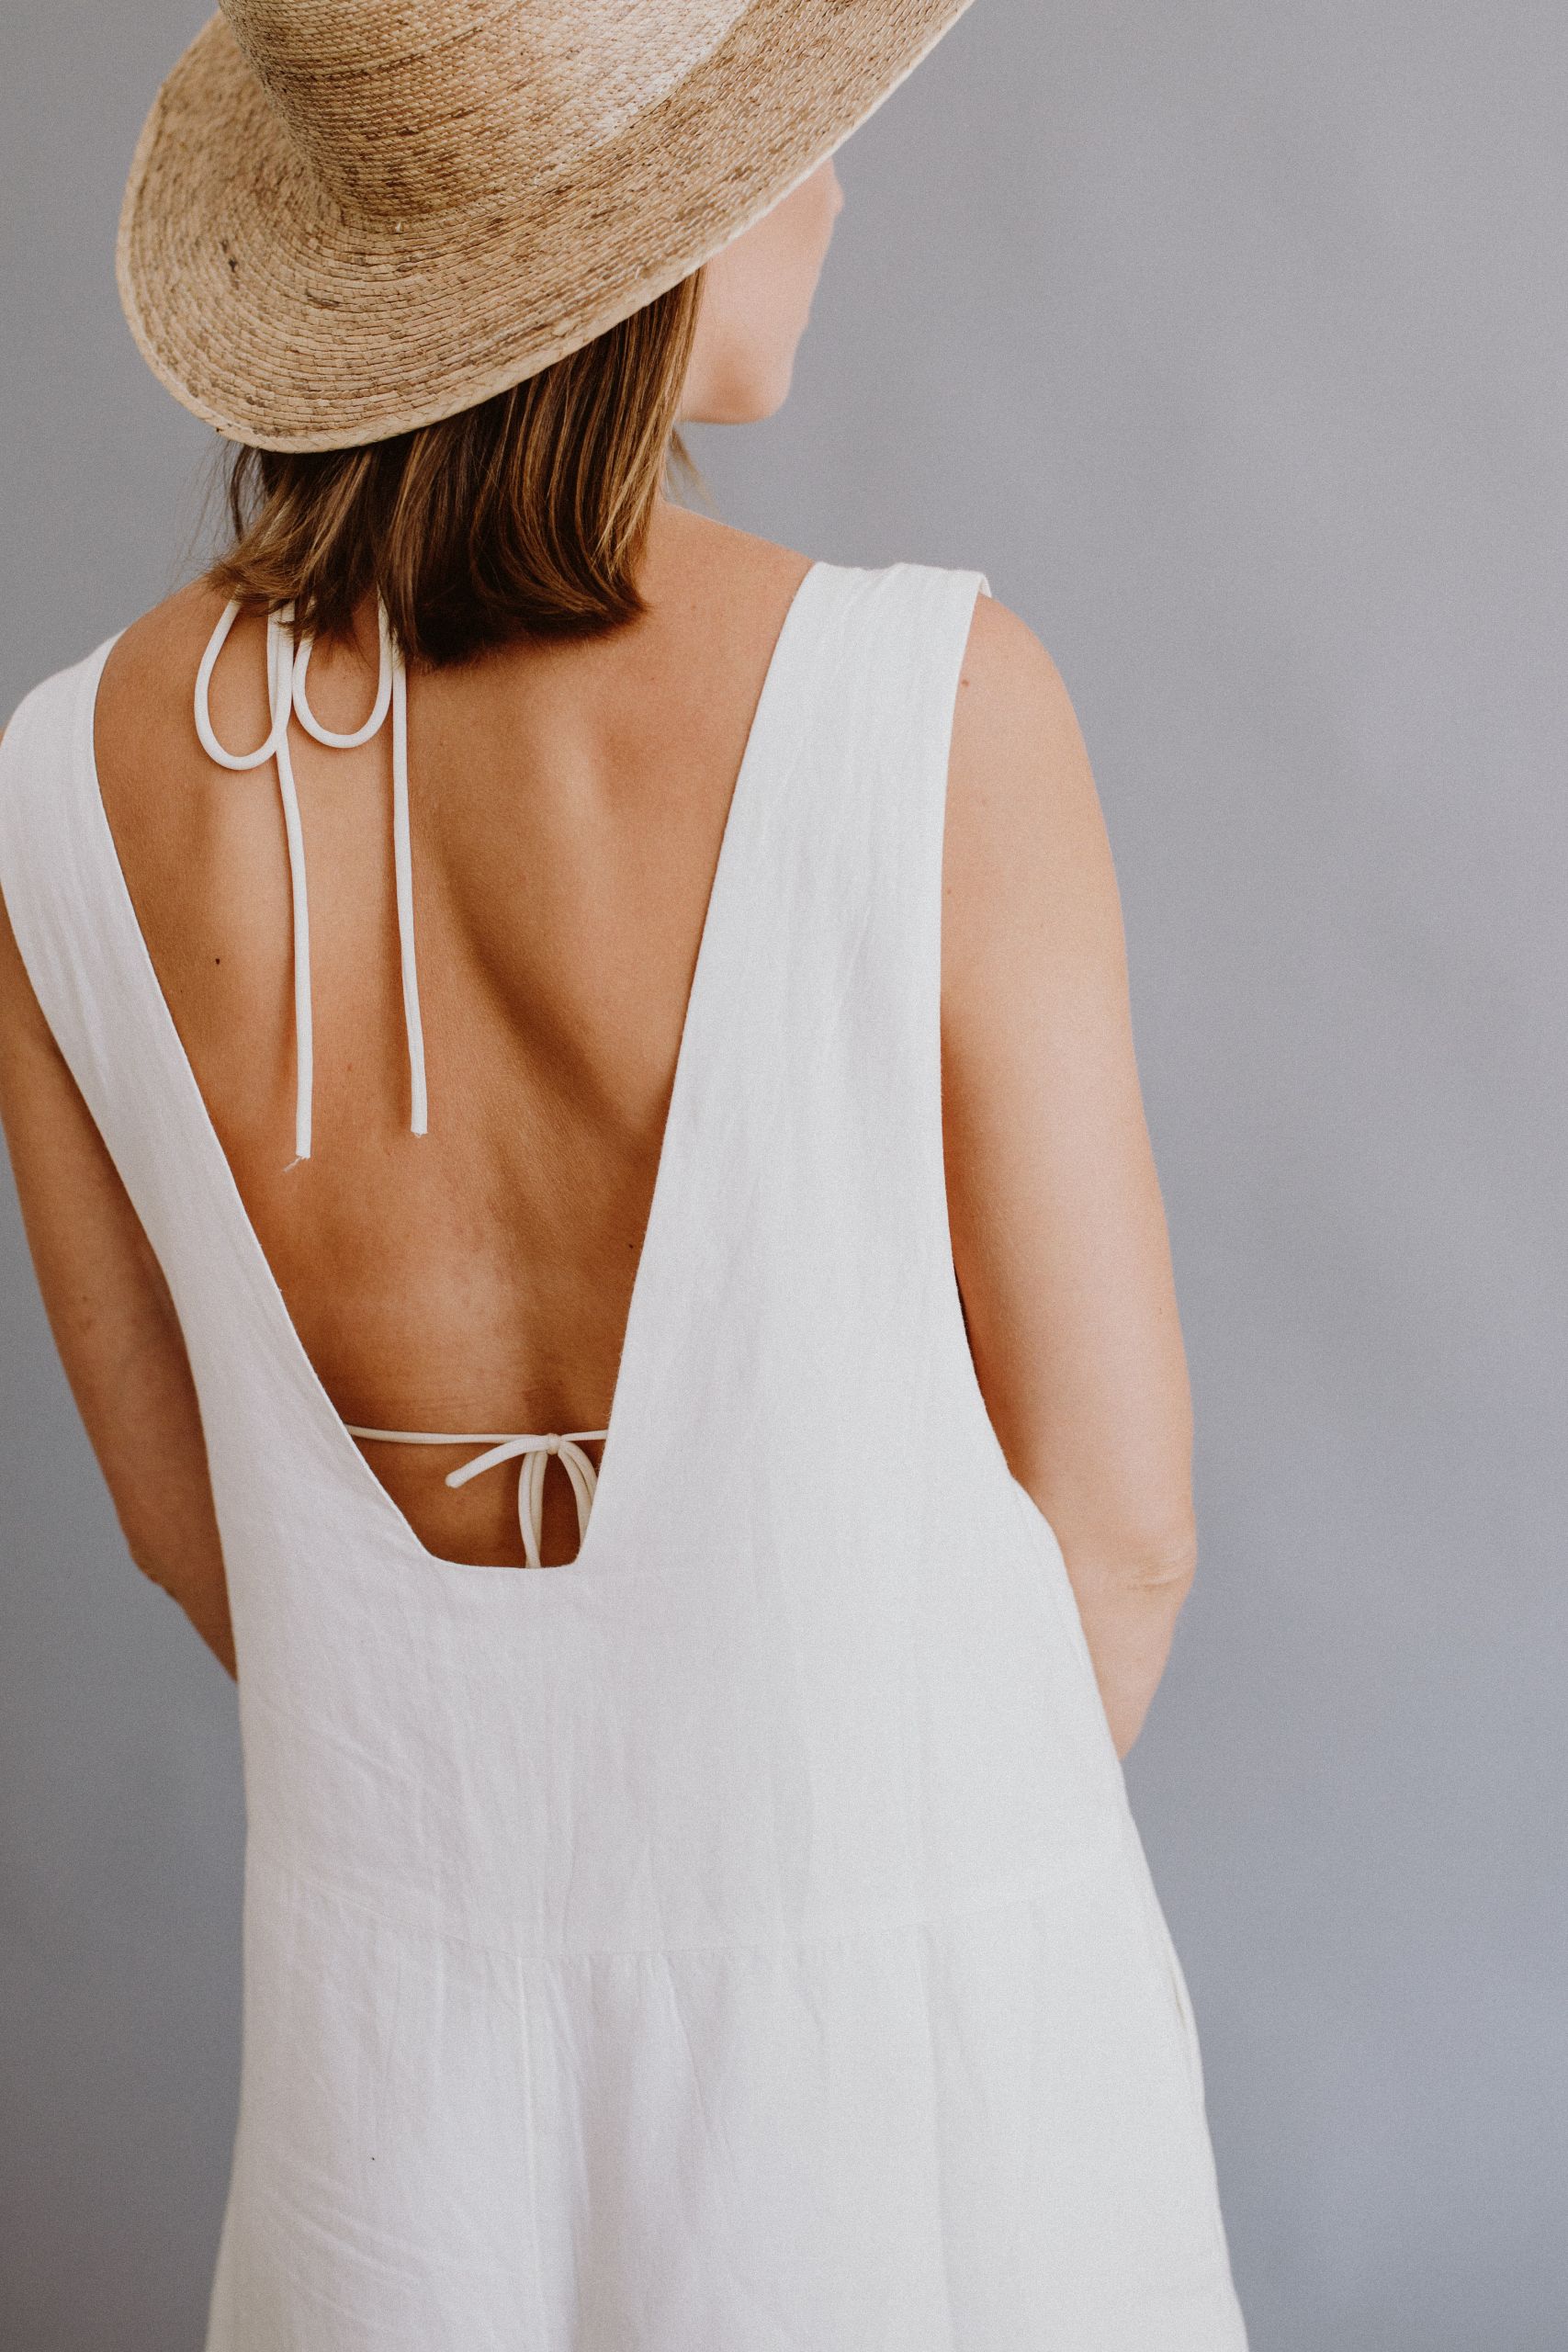 3 Ways To Wear: Linen Jumpsuit | The Daily Dose